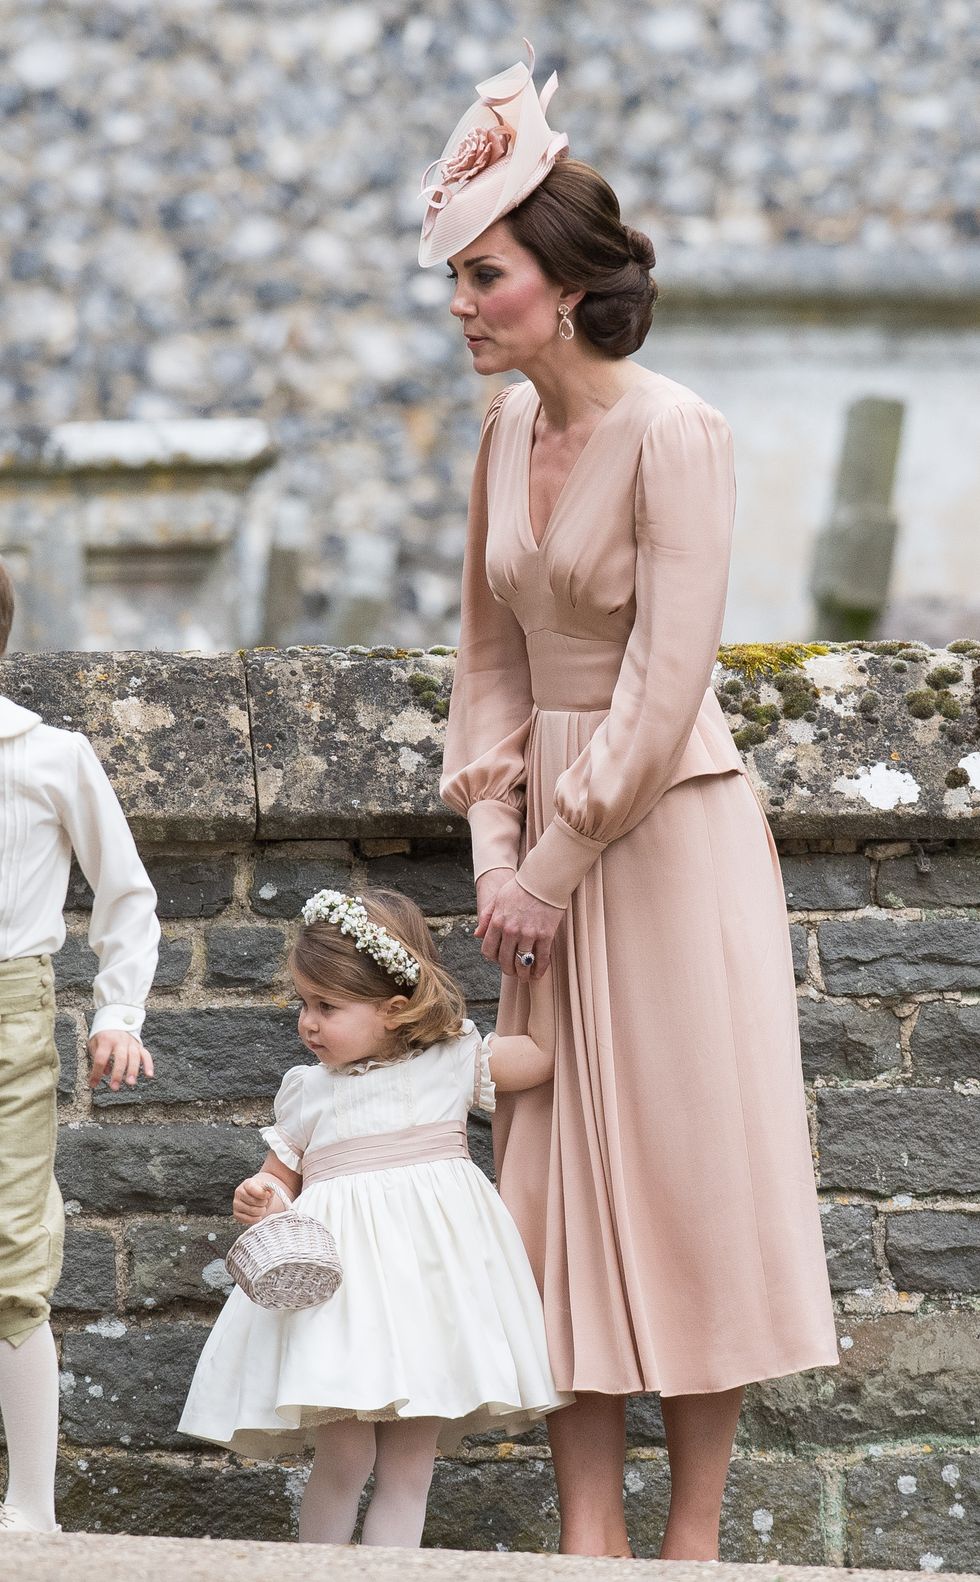 ENGLEFIELD GREEN, ENGLAND - MAY 20:  Princess Charlotte of Cambridge, bridesmaid and Catherine, Duchess of Cambridge attend the wedding Of Pippa Middleton and James Matthews at St Mark's Church on May 20, 2017 in Englefield Green, England.  (Photo by Samir Hussein/Samir Hussein/WireImage)